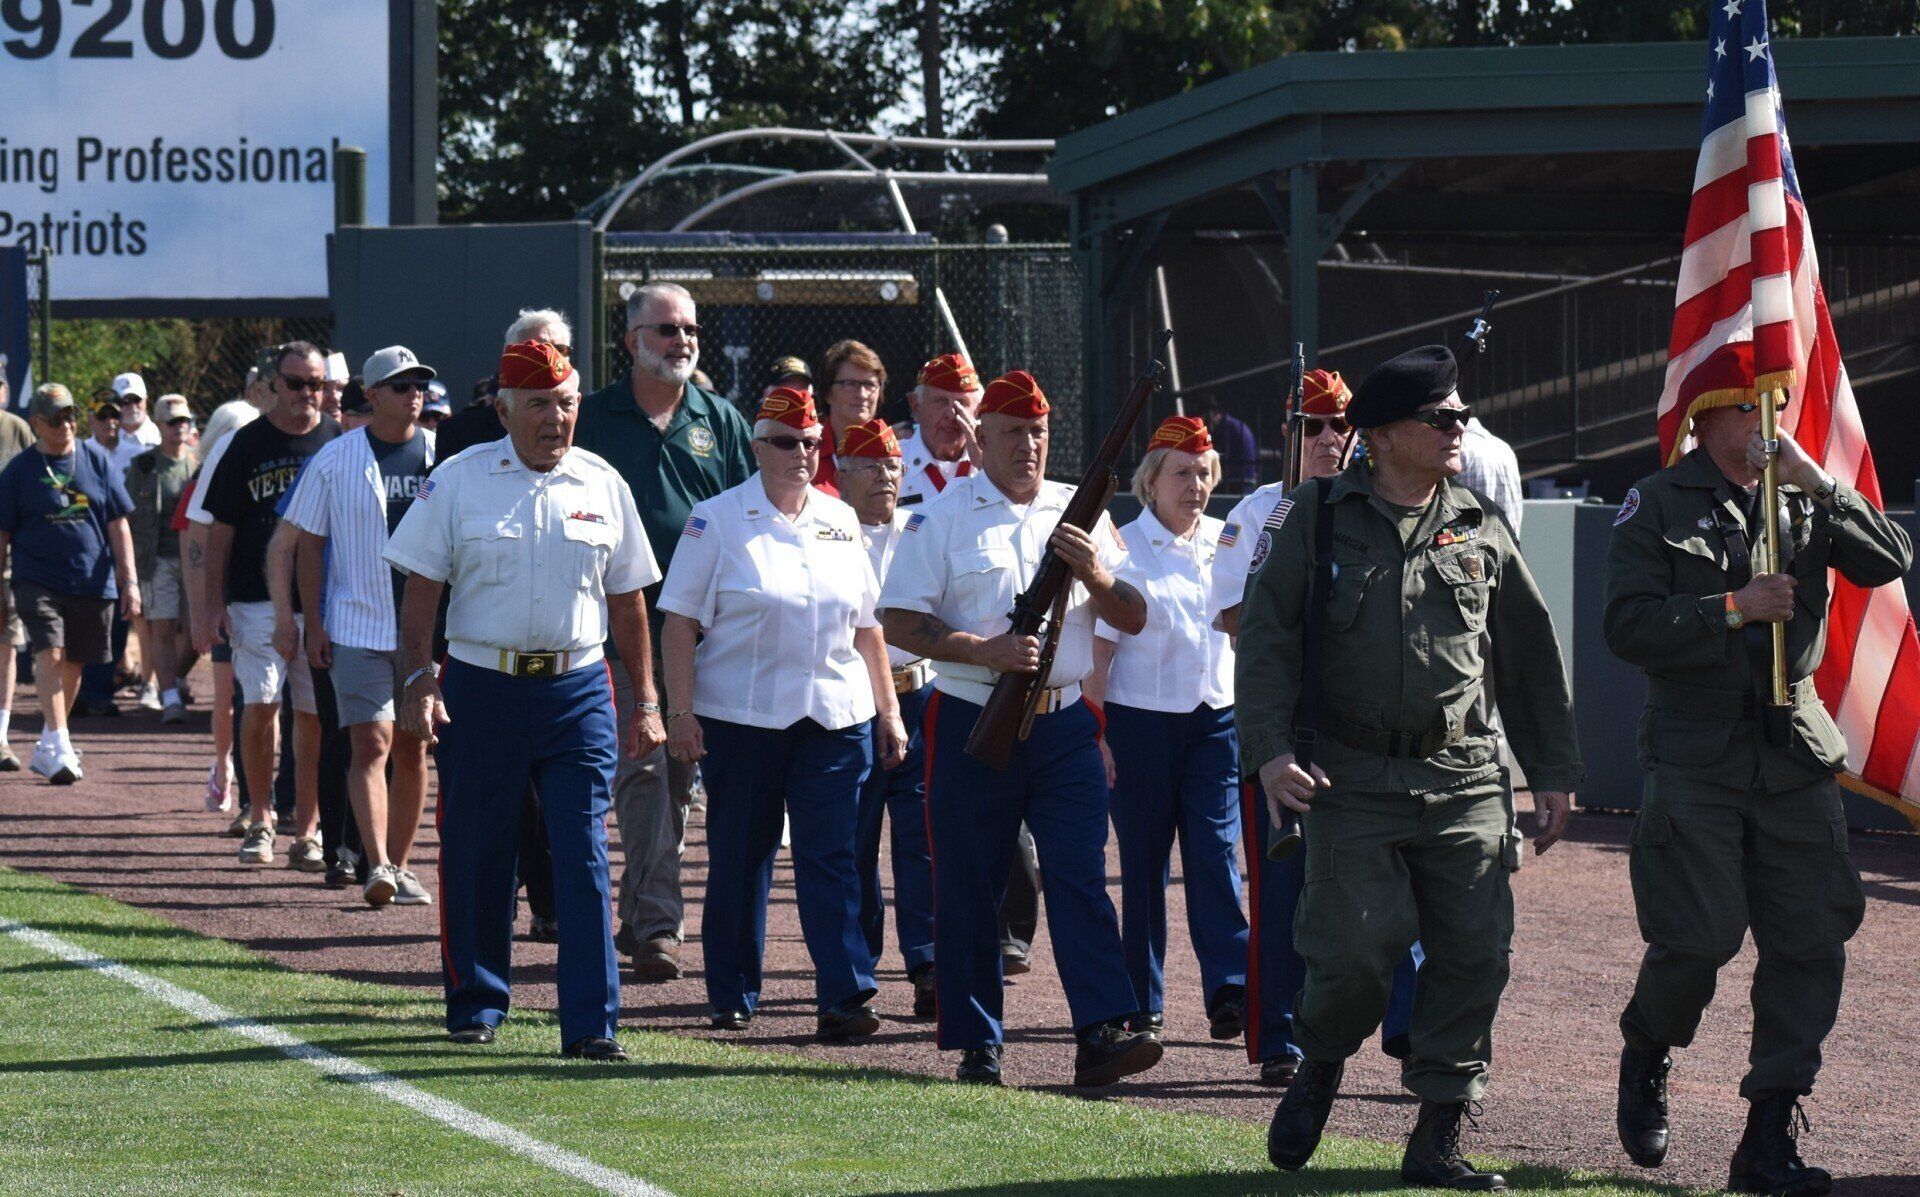 Veterans honored at baseball game supported by Bill Leary HVAC, NJ.